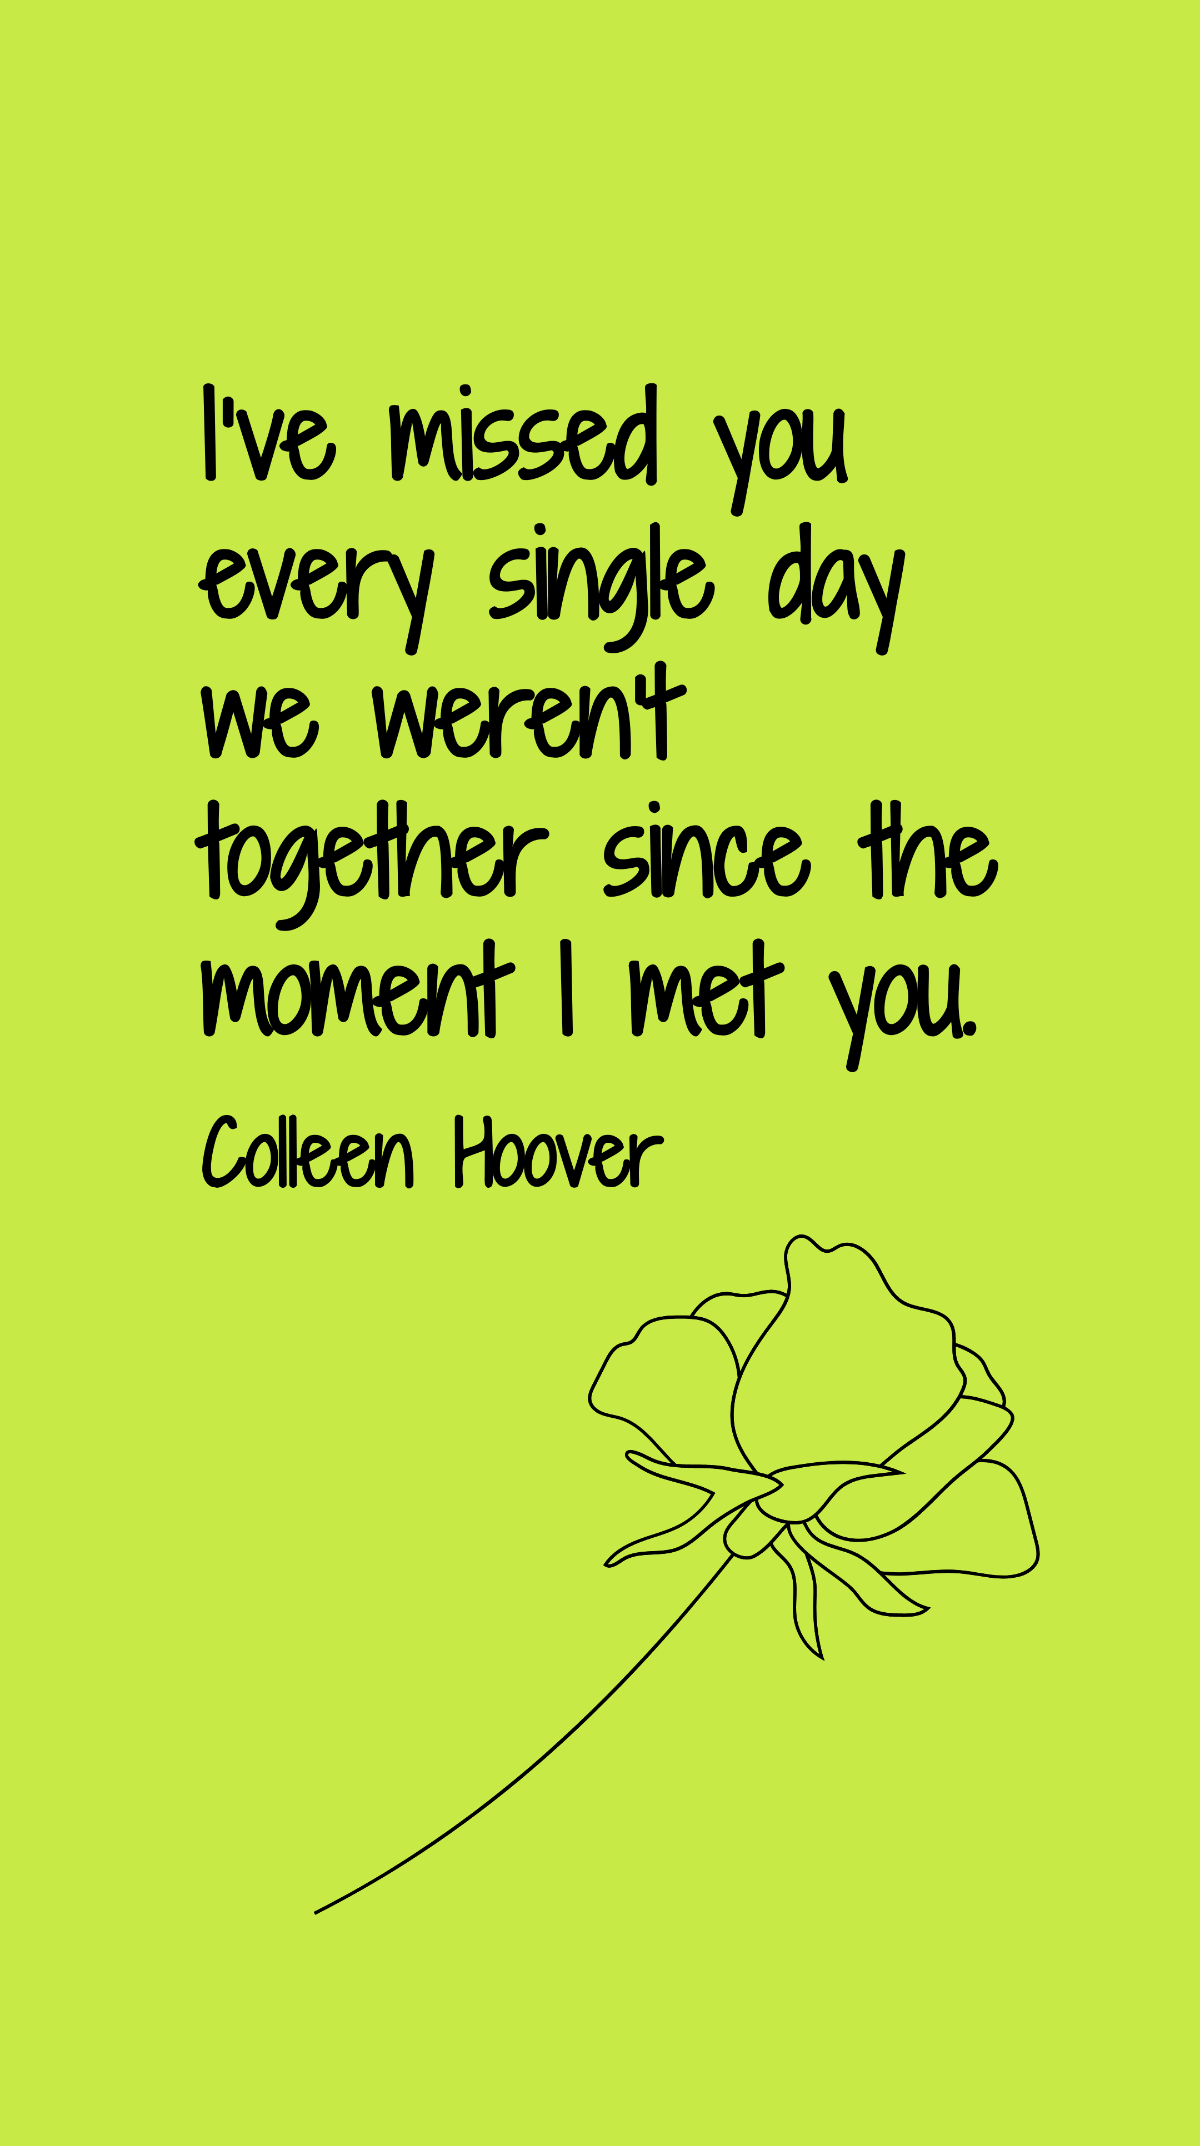 Colleen Hoover - I’ve missed you every single day we weren’t together since the moment I met you. Template